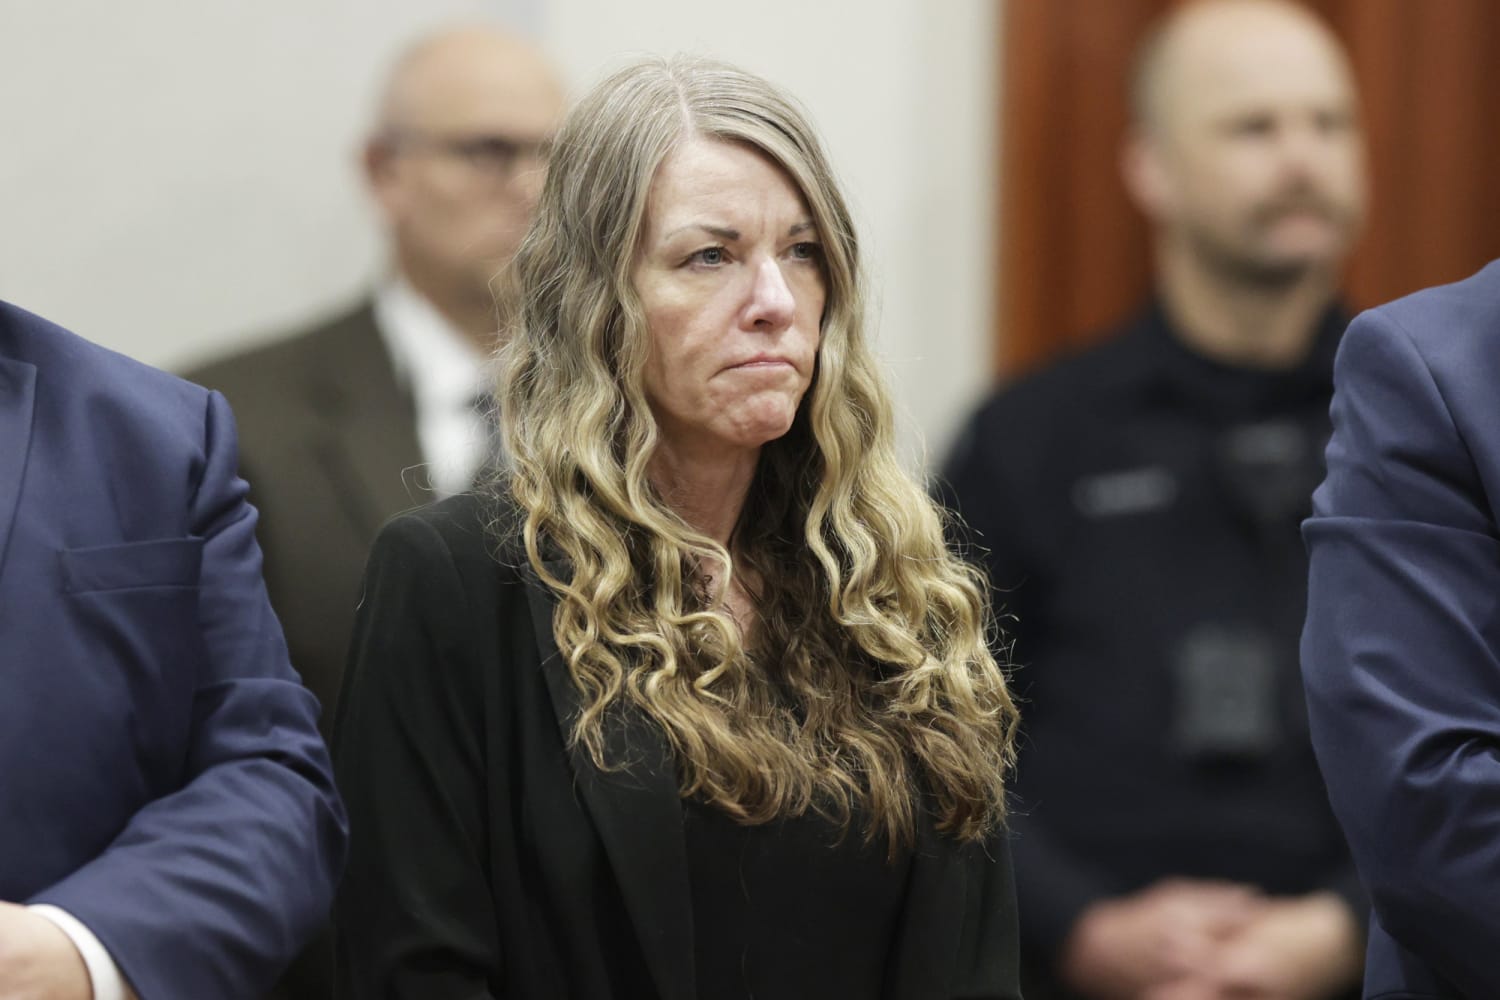 Lori Vallow, Idaho mom convicted in death of 2 kids, indicted on new murder conspiracy charge